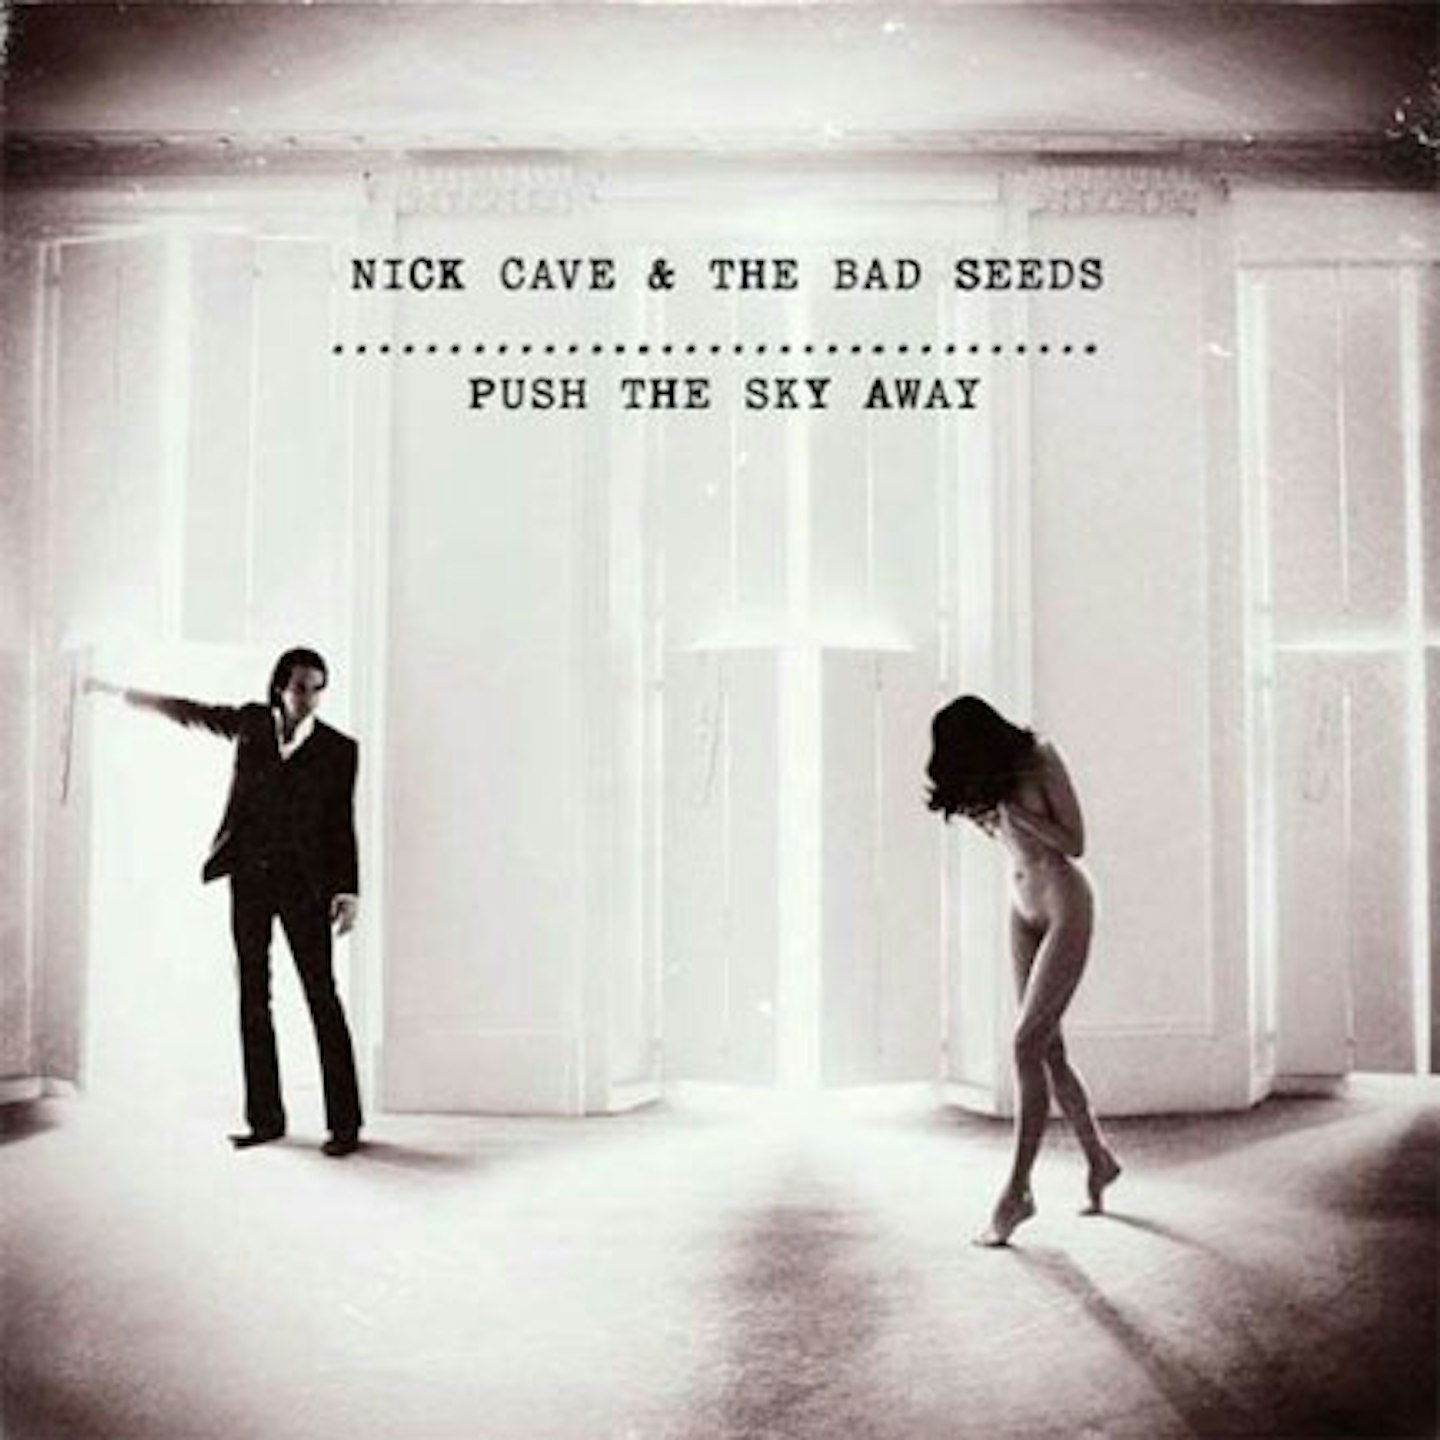 6. Push The Sky Away - Nick Cave & The Bad Seeds